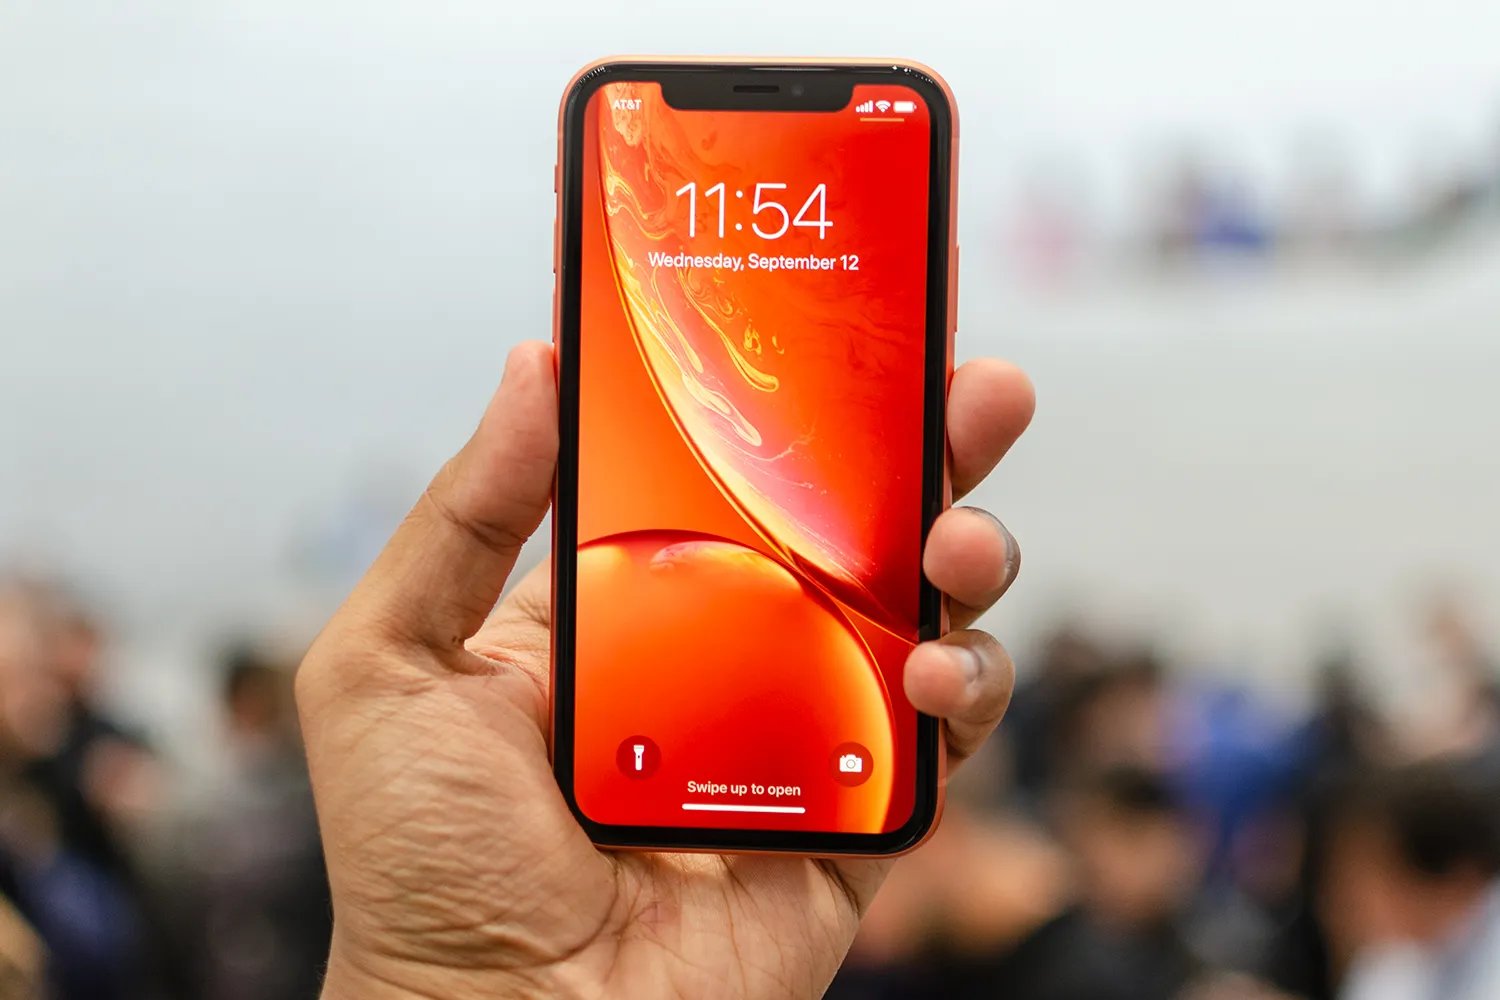 Quick And Easy: Screenshot On IPhone 11 Using Tap Technique